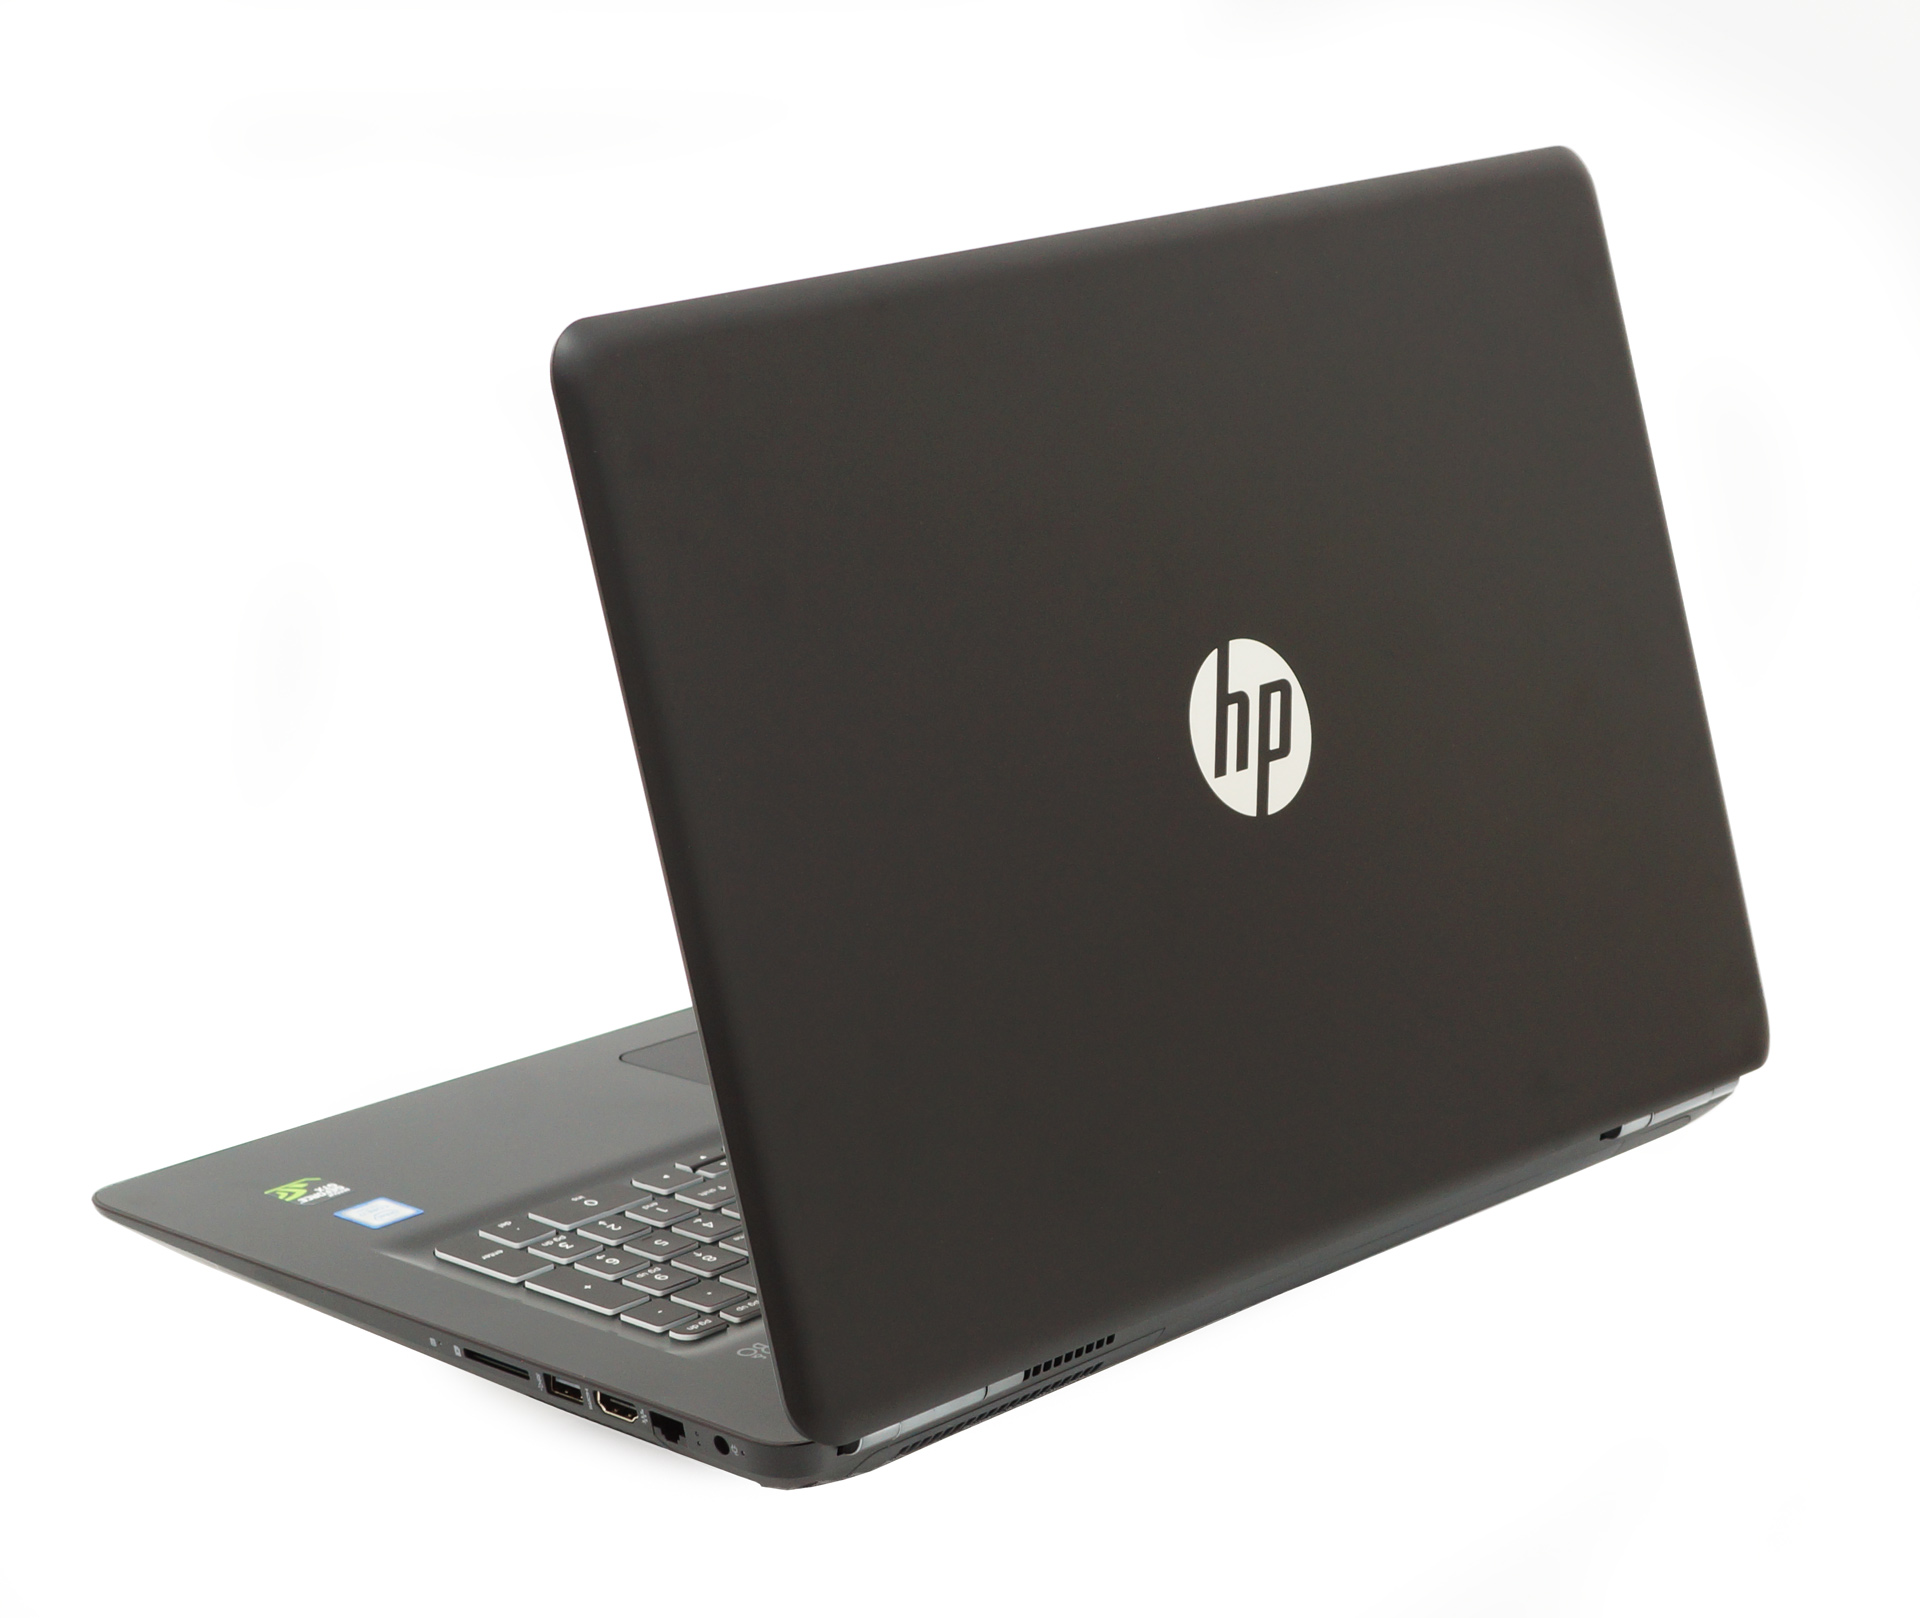 HP Pavilion 17 (17-ab300) review - fairly priced 17-inch all